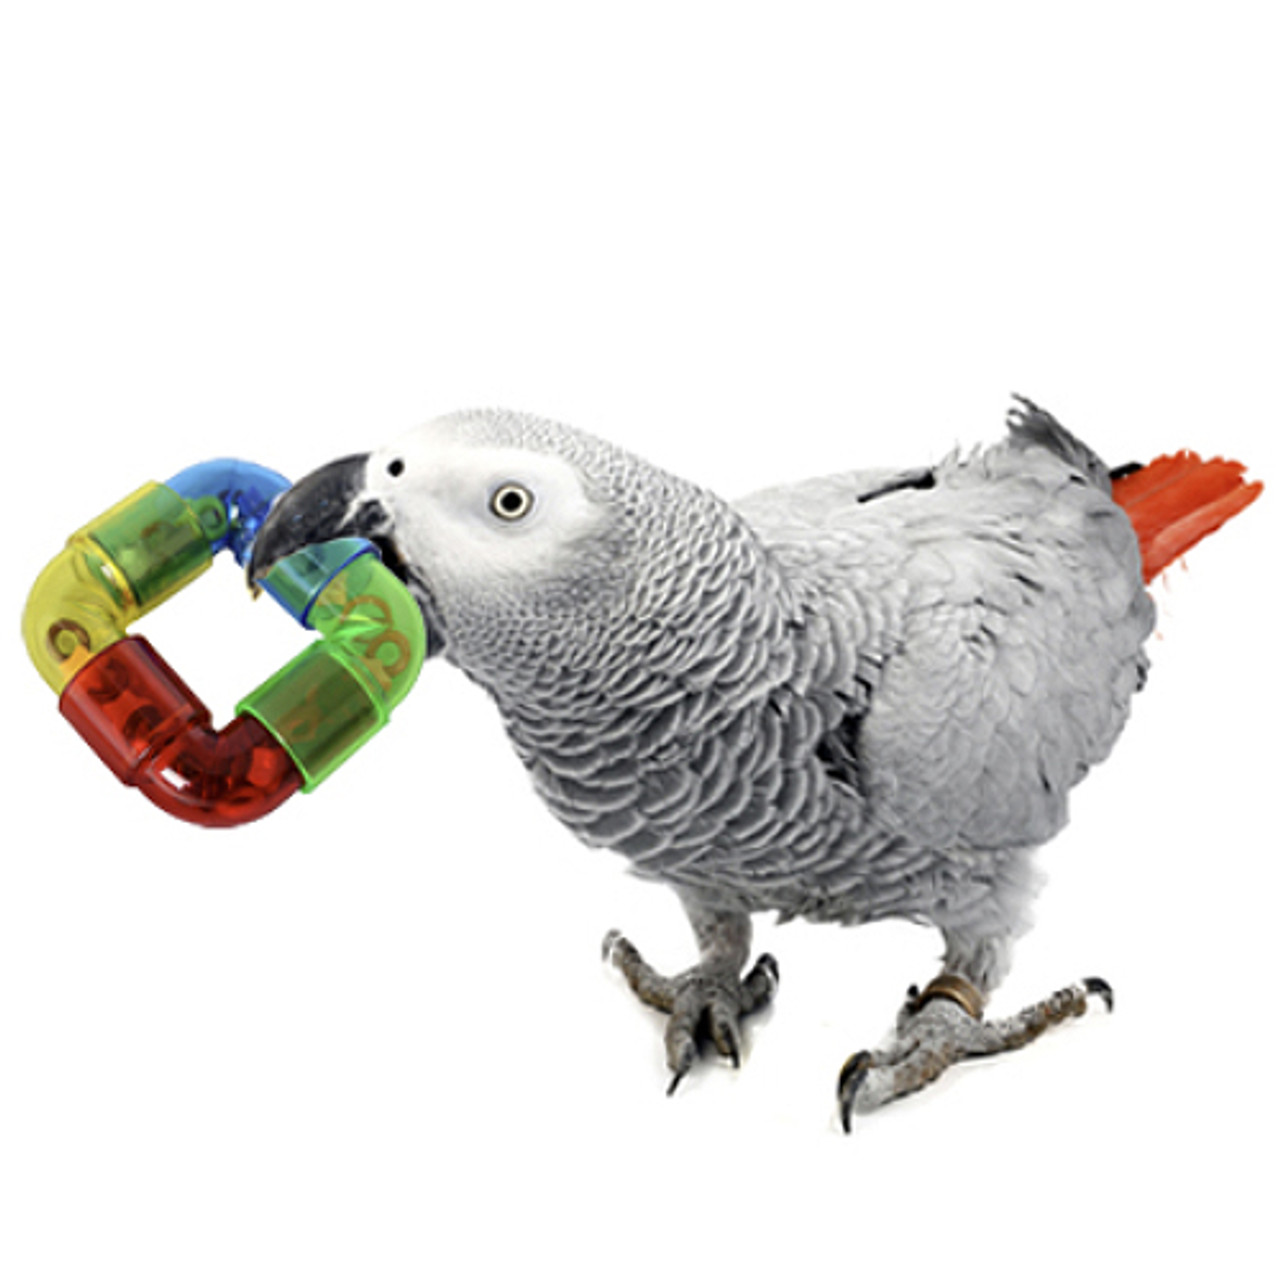 https://cdn11.bigcommerce.com/s-xzdde/images/stencil/1280x1280/products/4195/9419/Bird_Foot_Toys_Rattler_Square_with_Grey__43274.1577576130.jpg?c=2